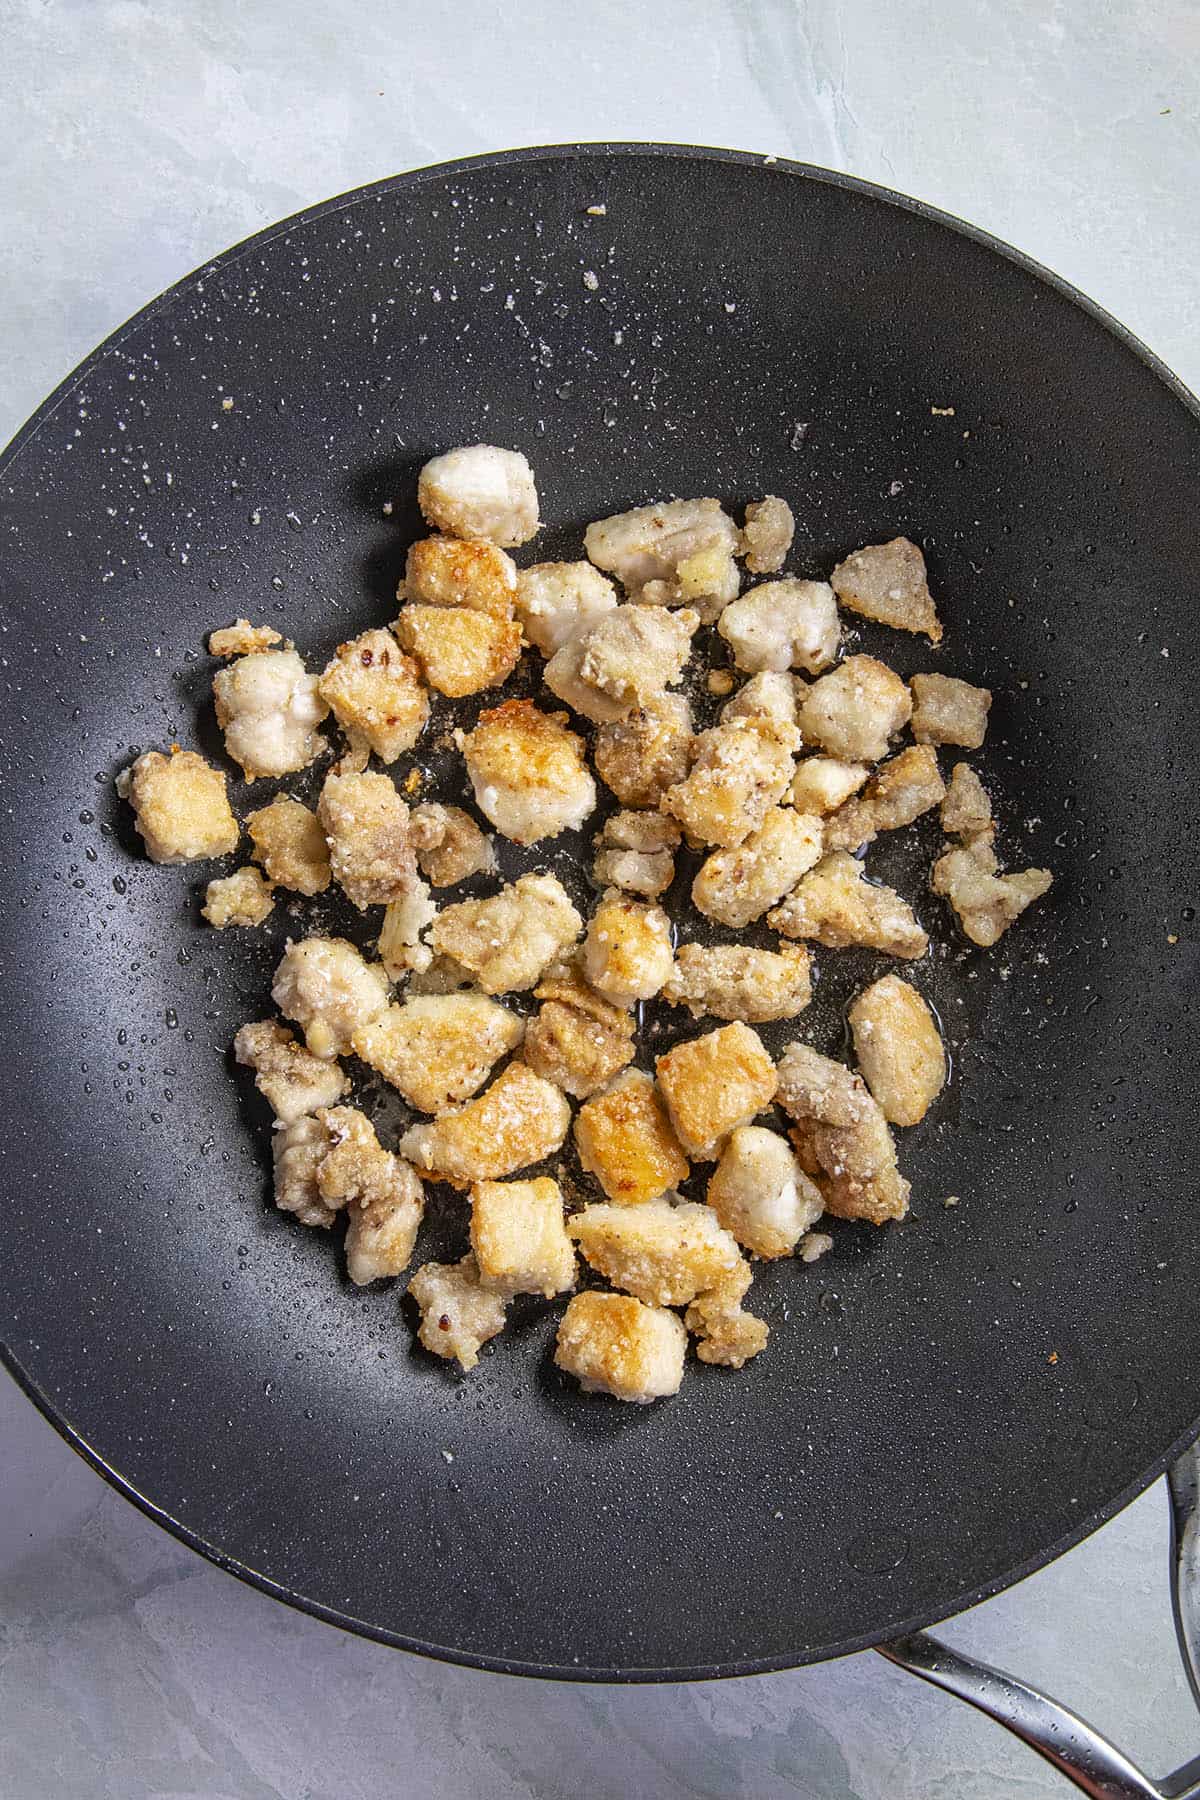 Frying the coated chicken in the hot pan to make Hunan chicken